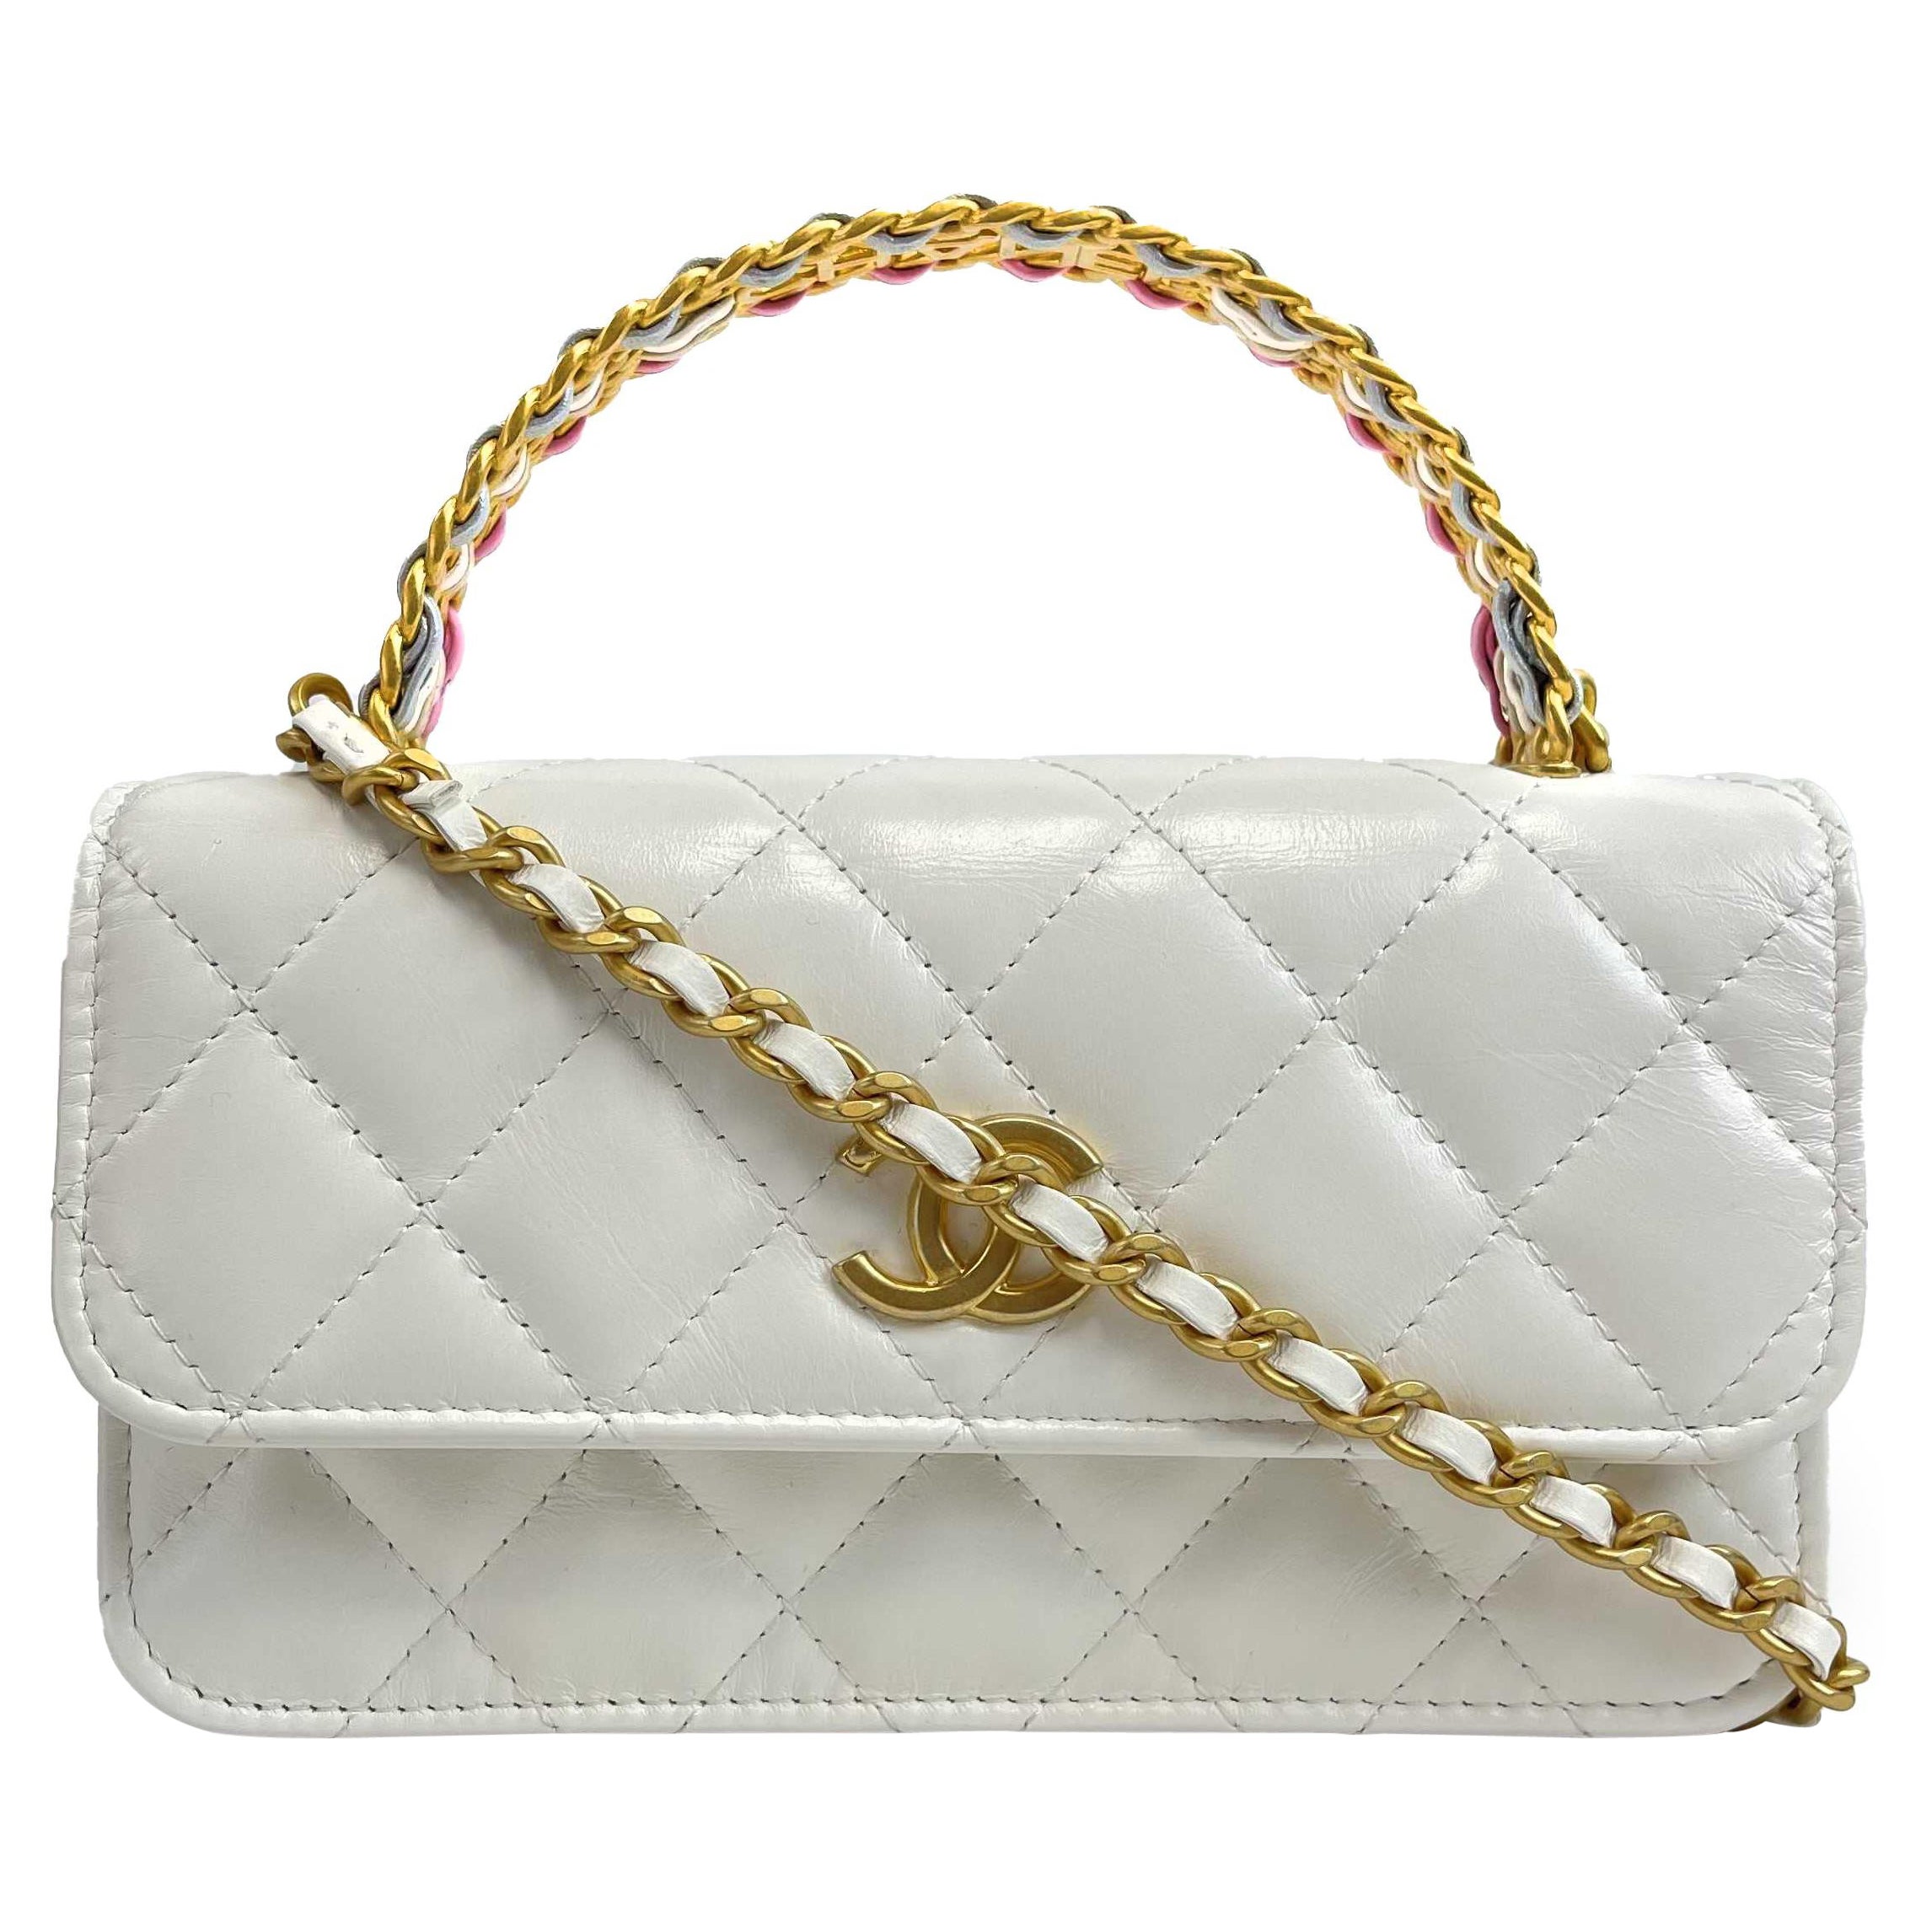 CHANEL - Phone Holder Quilted White Lambskin CC ‘CHANEL’ Top Handle / Crossbody